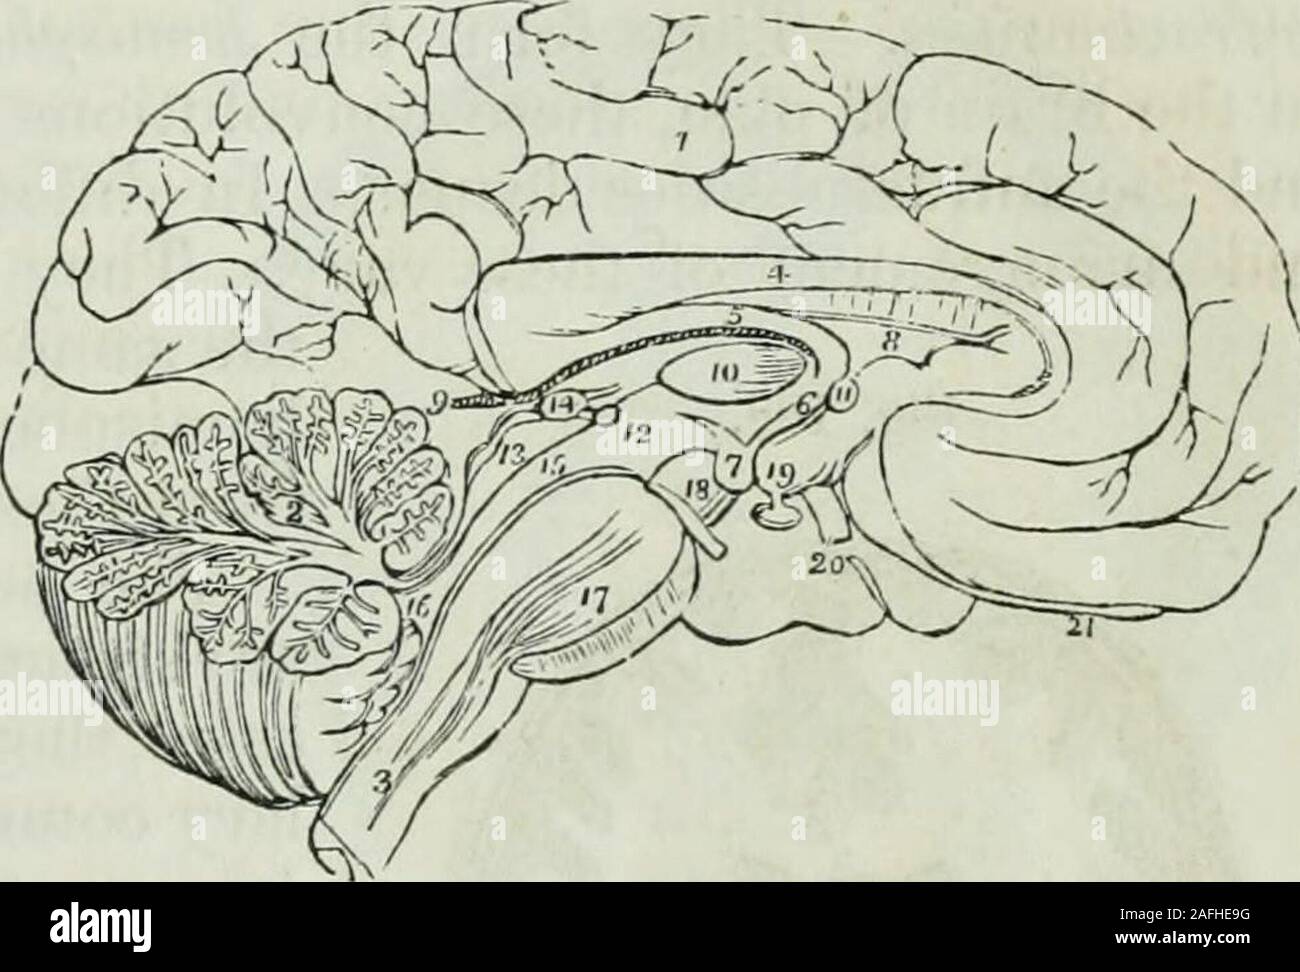 . Human physiology. N. 631 Besides the protection afforded by the bony strnctiire to the delicatemedulla, M. Magendie has pointed out another, which he was the fiistto detect. The canal, formed by the dura mater around the spinalcord, is much larger than is necessary to contain that organ; but,during life, the whole of the intermediate space is filled with a serousfluid, which strongly distends the membrane, so that it will frequentlyspirt out to a distance of several inches, when a puncture is made inthe membrane. To this fluid he has given the epithet cephalo-sjjinal;and he conceives, that i Stock Photo